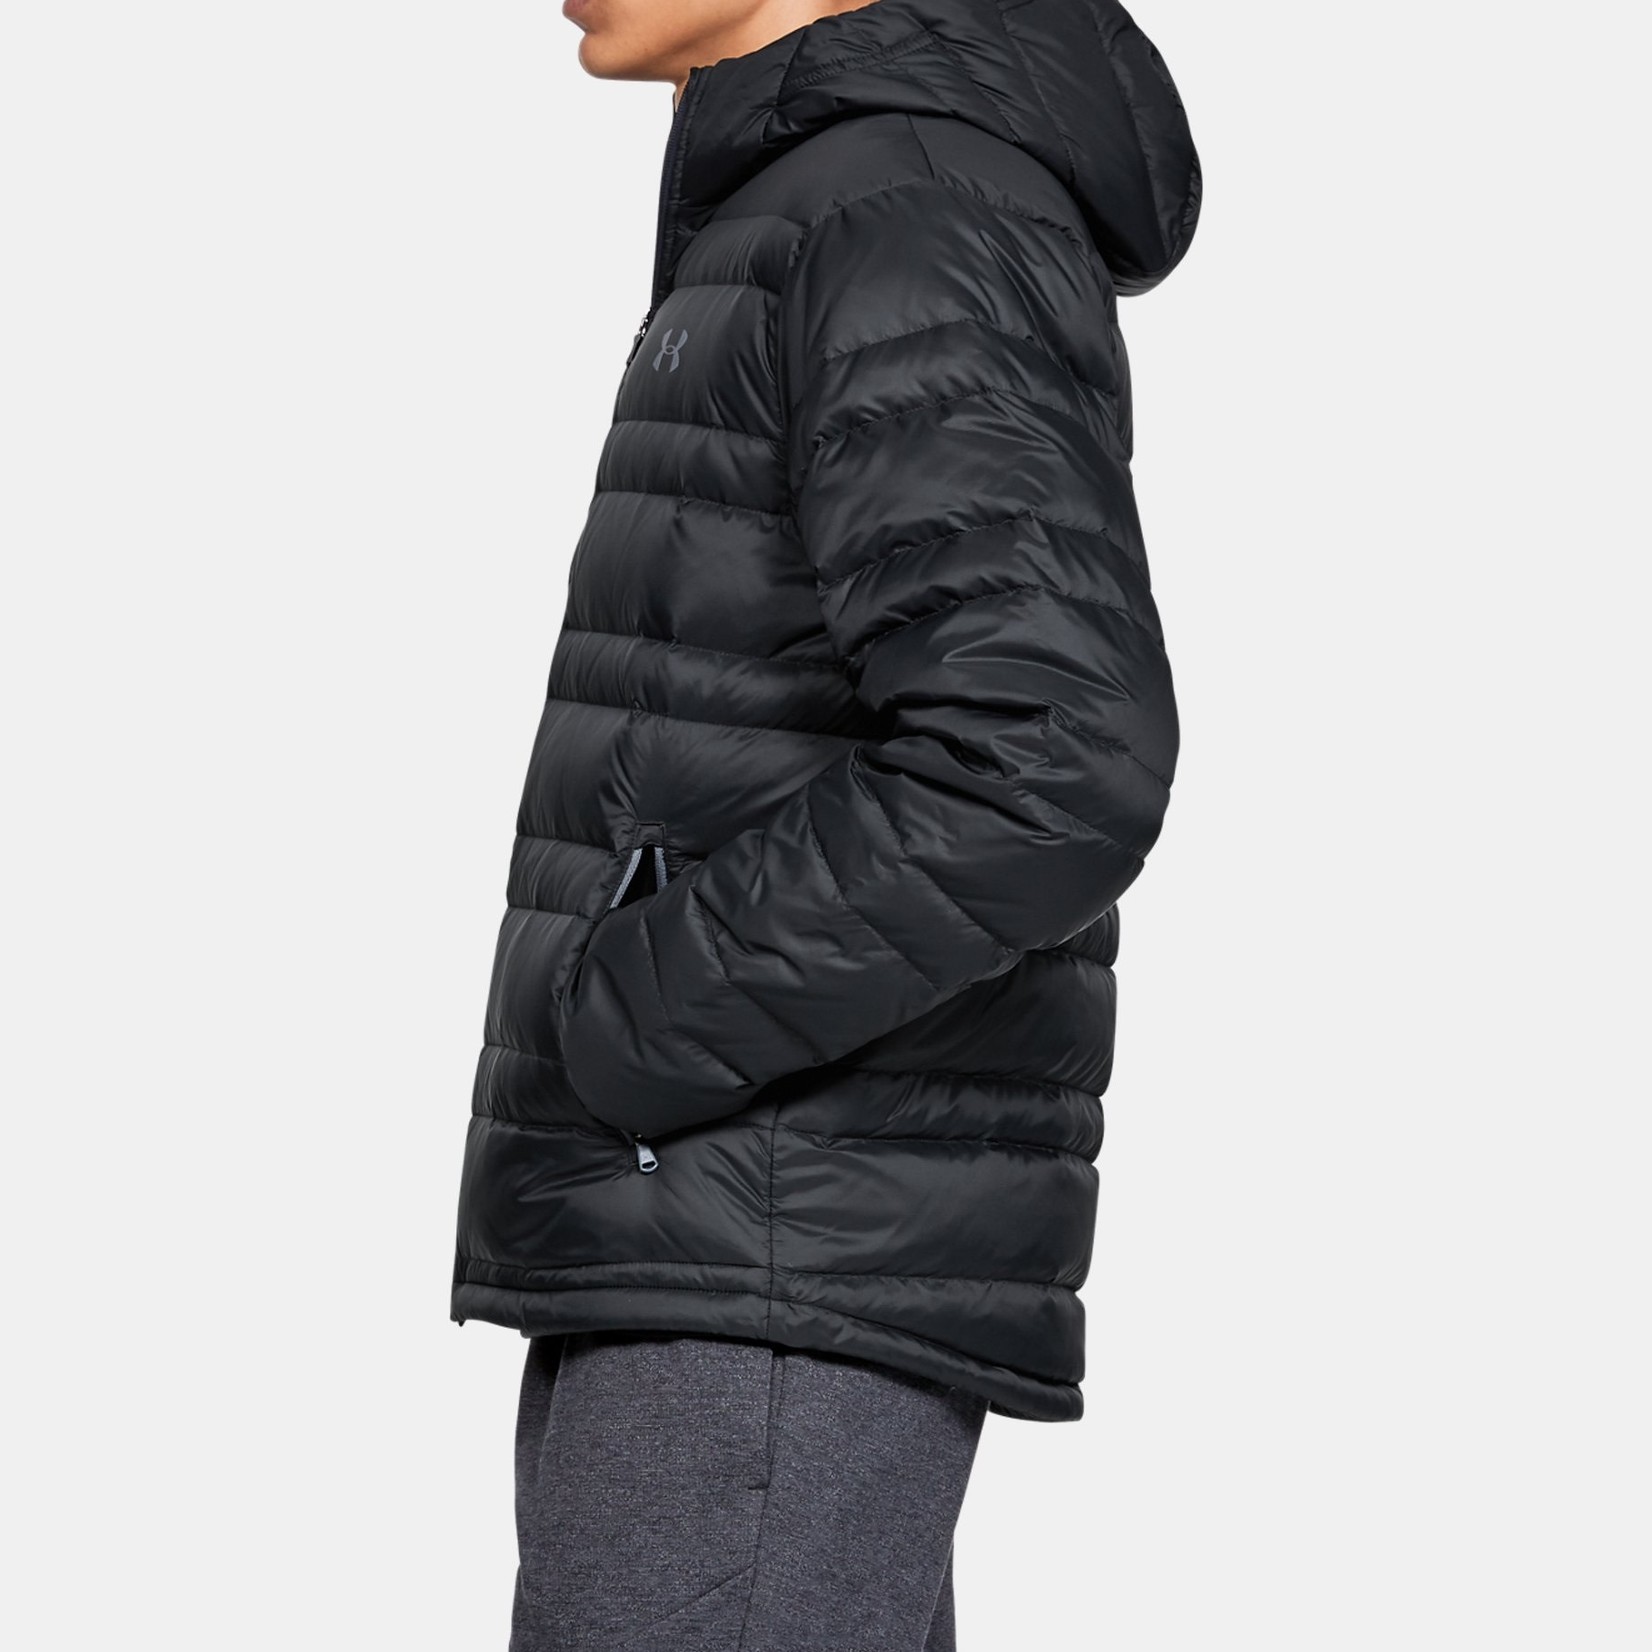 Under Armour UA Armour Down Hooded Jacket - Black